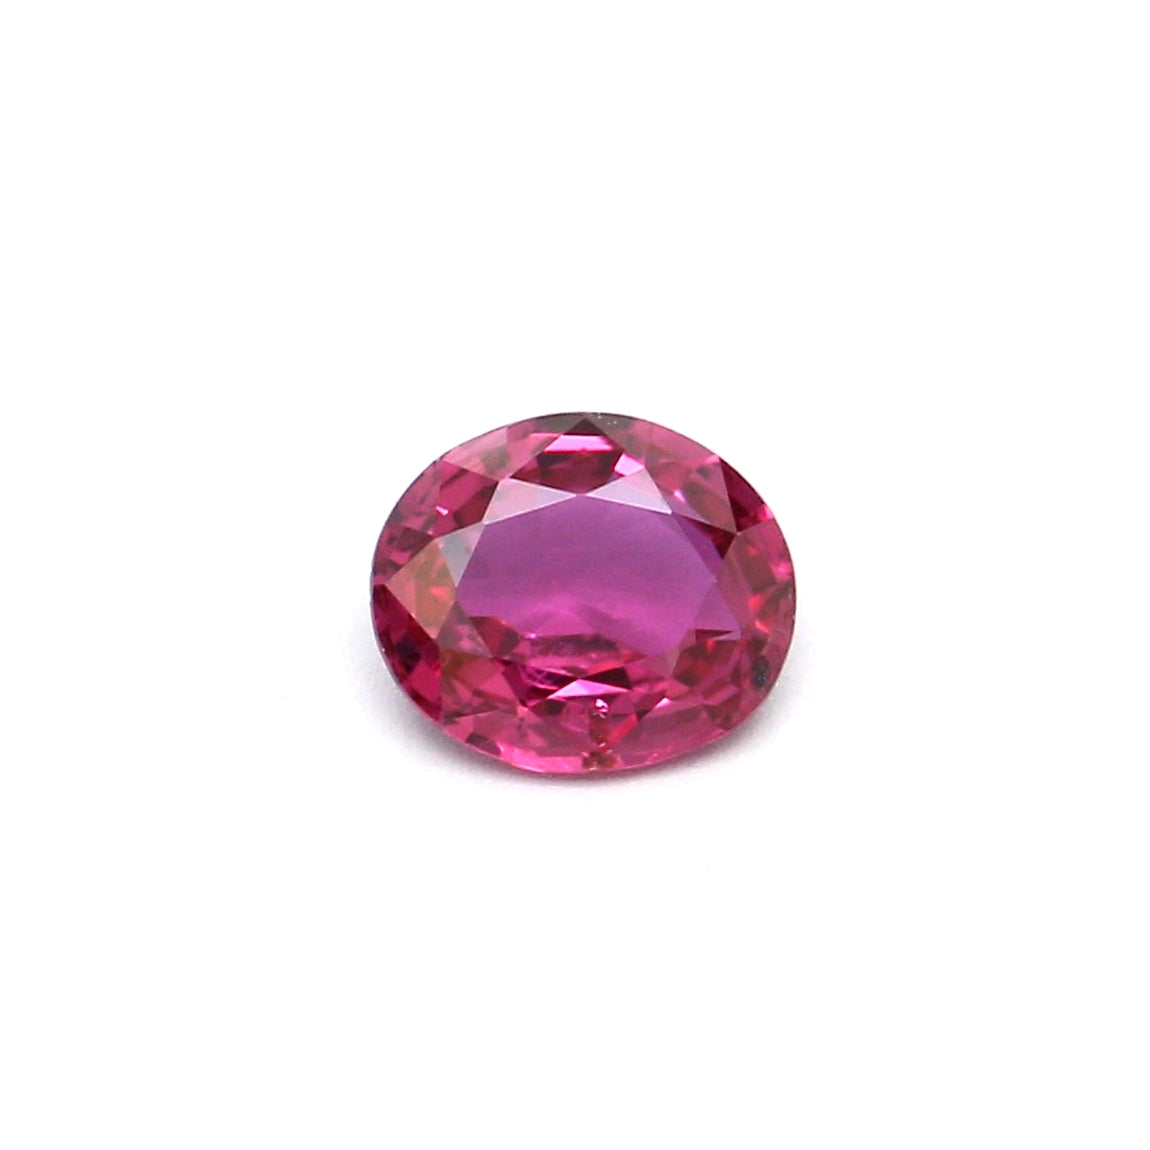 0.32ct Pinkish Red, Oval Ruby, Heated, Thailand - 4.69 x 4.00 x 1.97mm